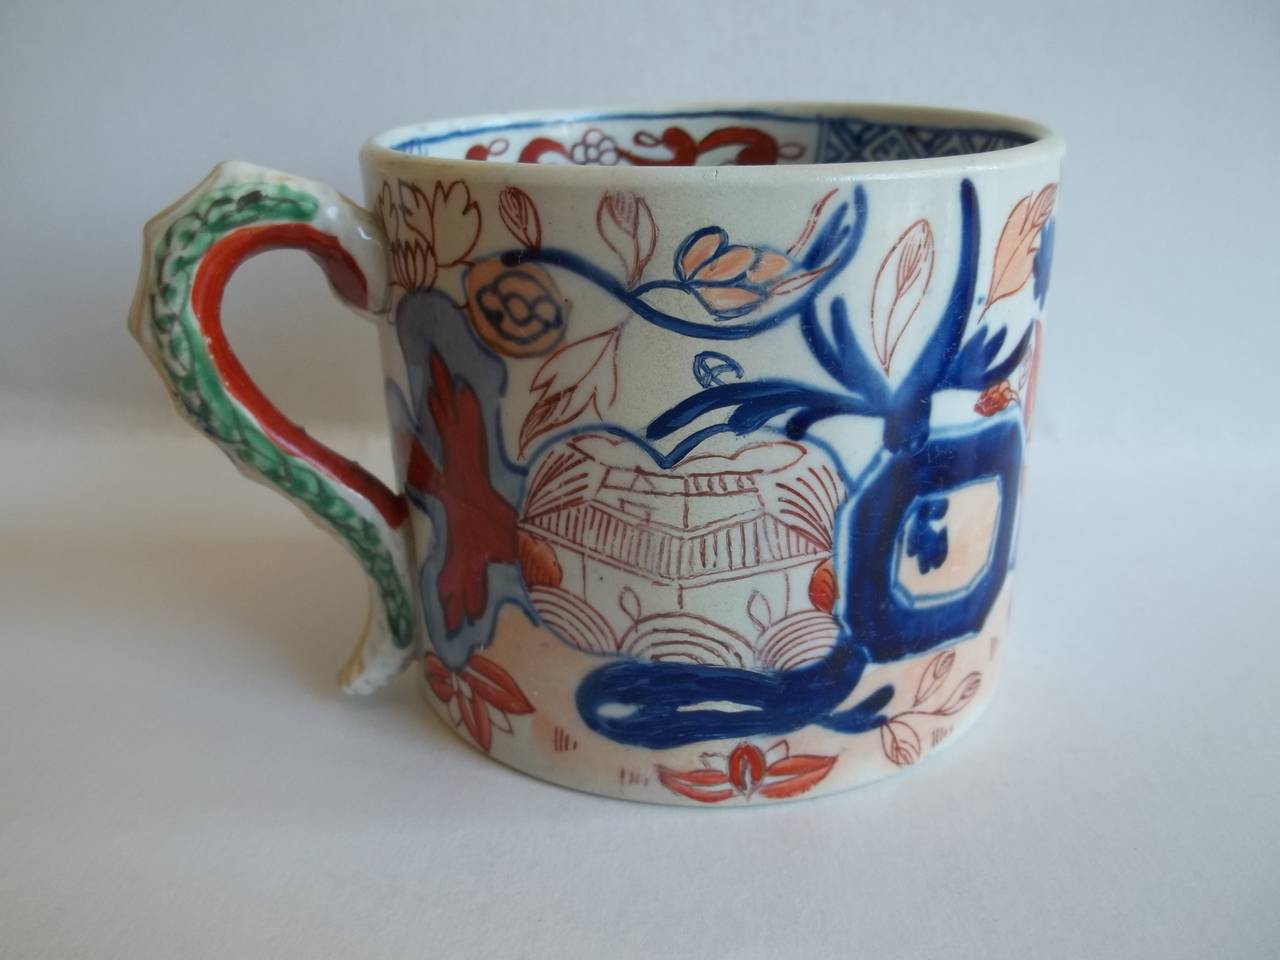 This is one of the earliest pieces of Ironstone that Mason's produced and carries the rarer circular impressed mark, reading: Patent Ironstone China, on the base of the Mug, dating this piece to the earliest, Late Georgian, 1813 to 1820